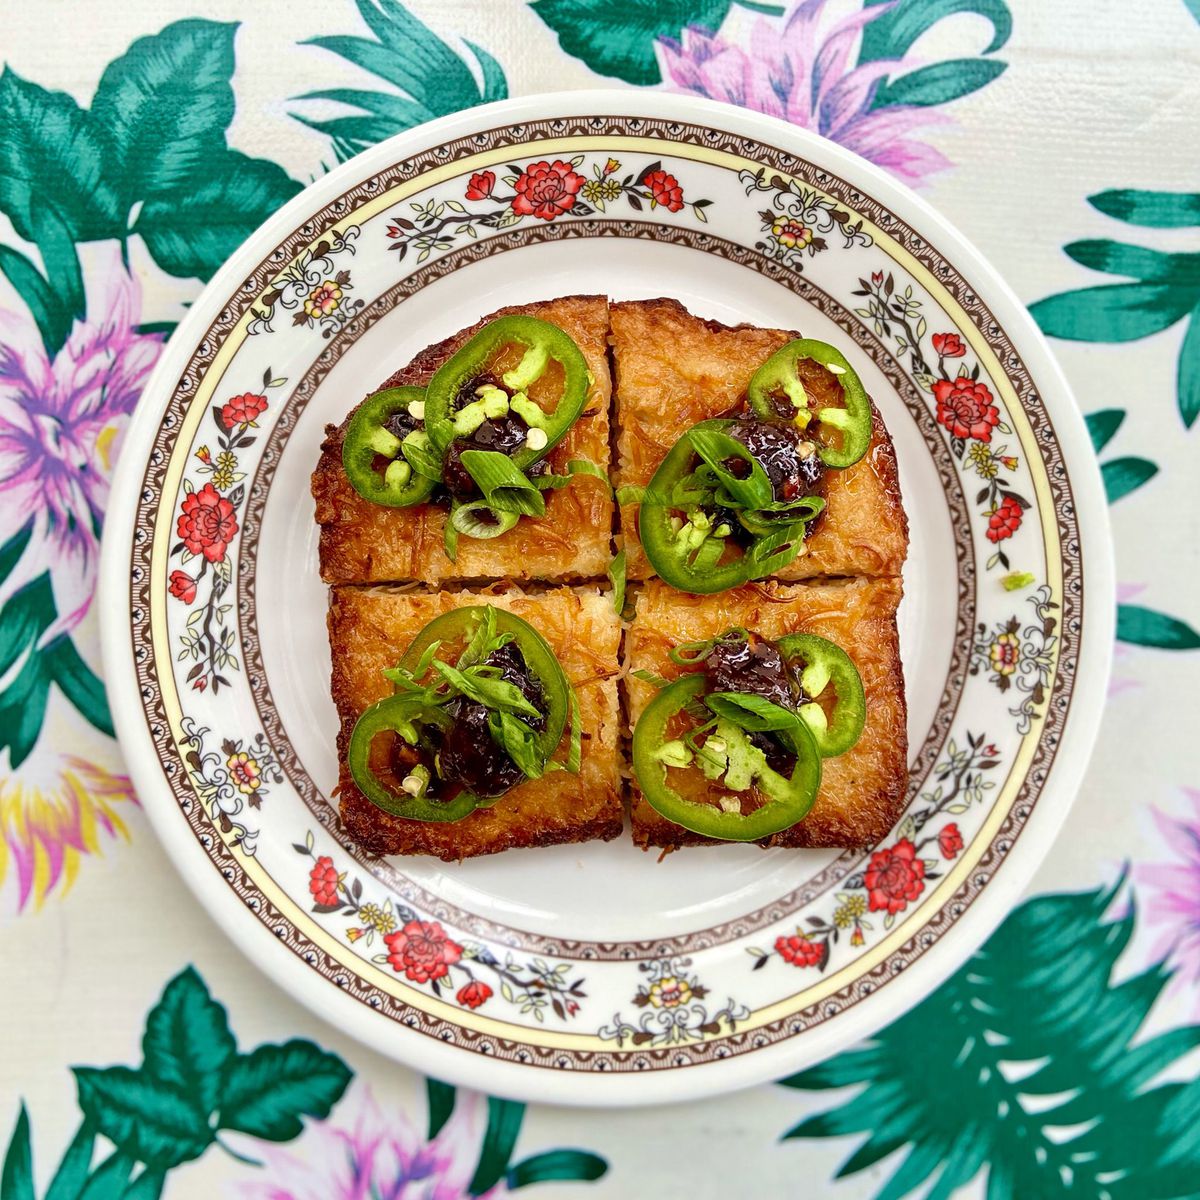 A large square of shrimp toast topped with large rings of jalapeño peppers on a China dish with a brightly colored tablecloth background